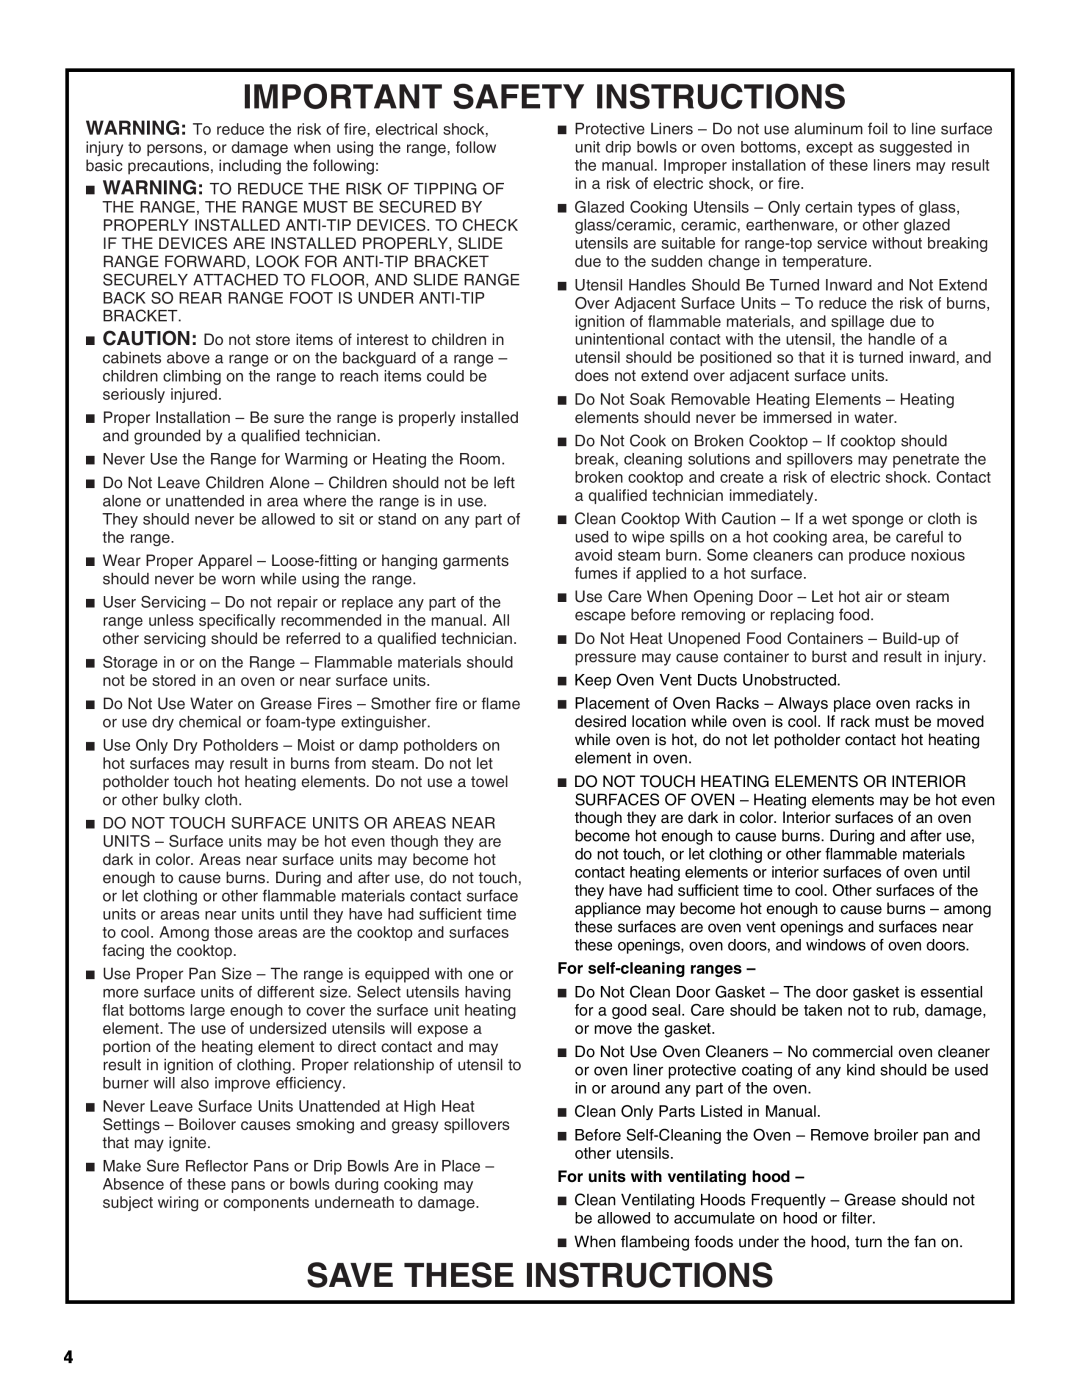 Whirlpool YIES366RS2 manual Important Safety Instructions, Save These Instructions, For self-cleaning ranges 